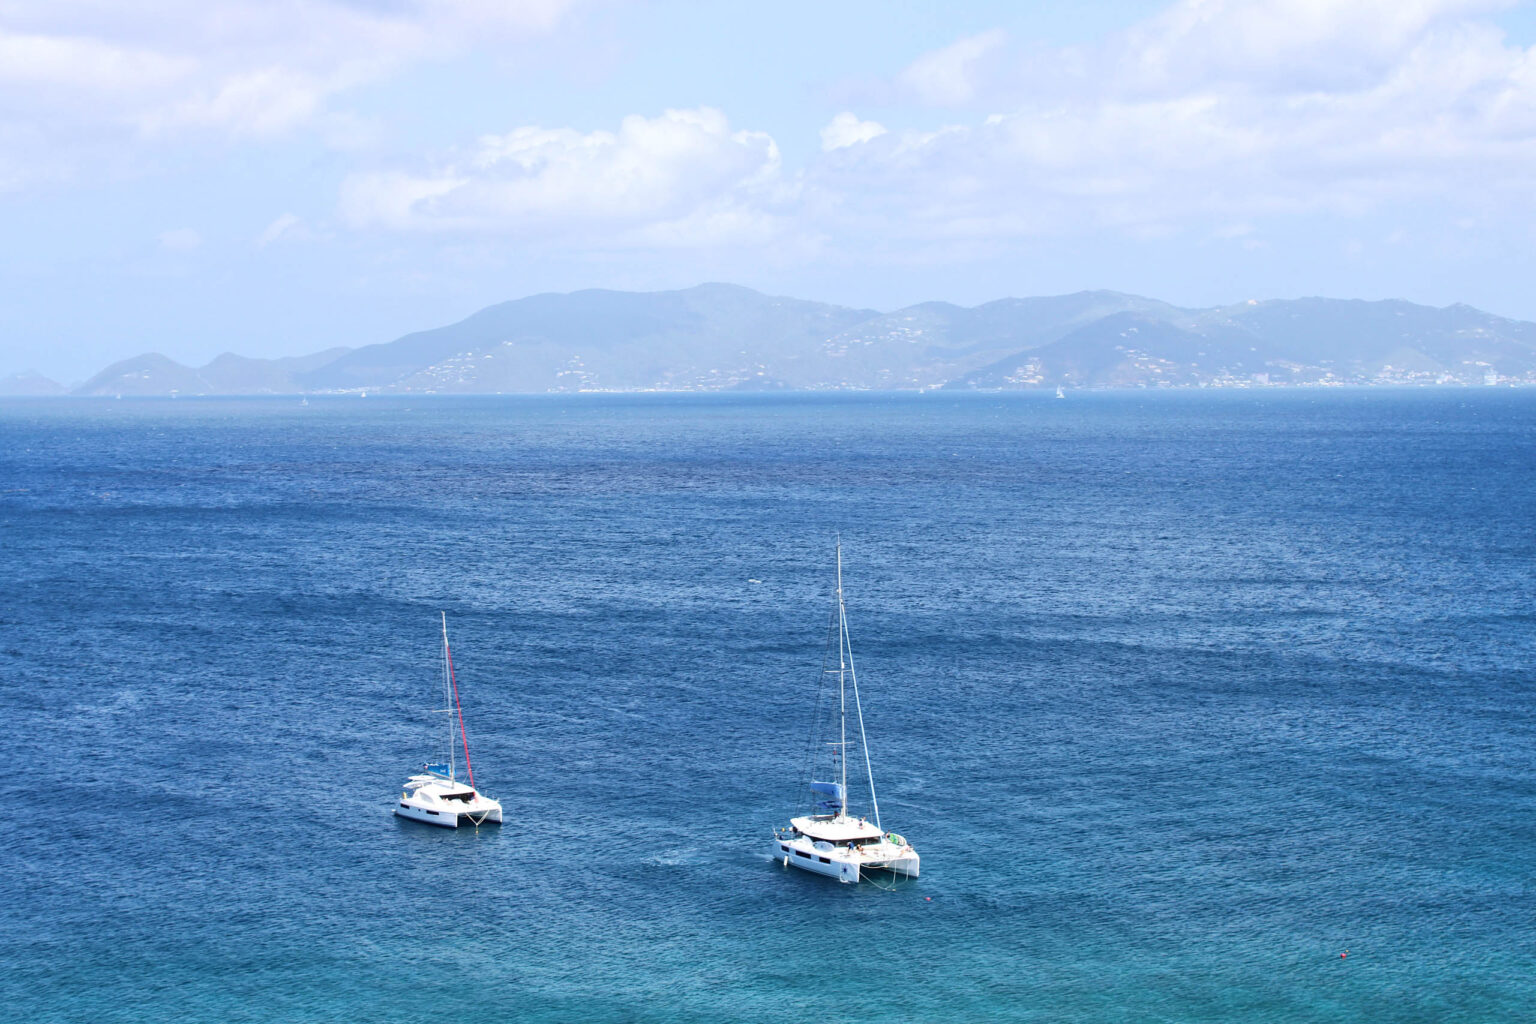 Two Sail Caribbean boats in the ocean.